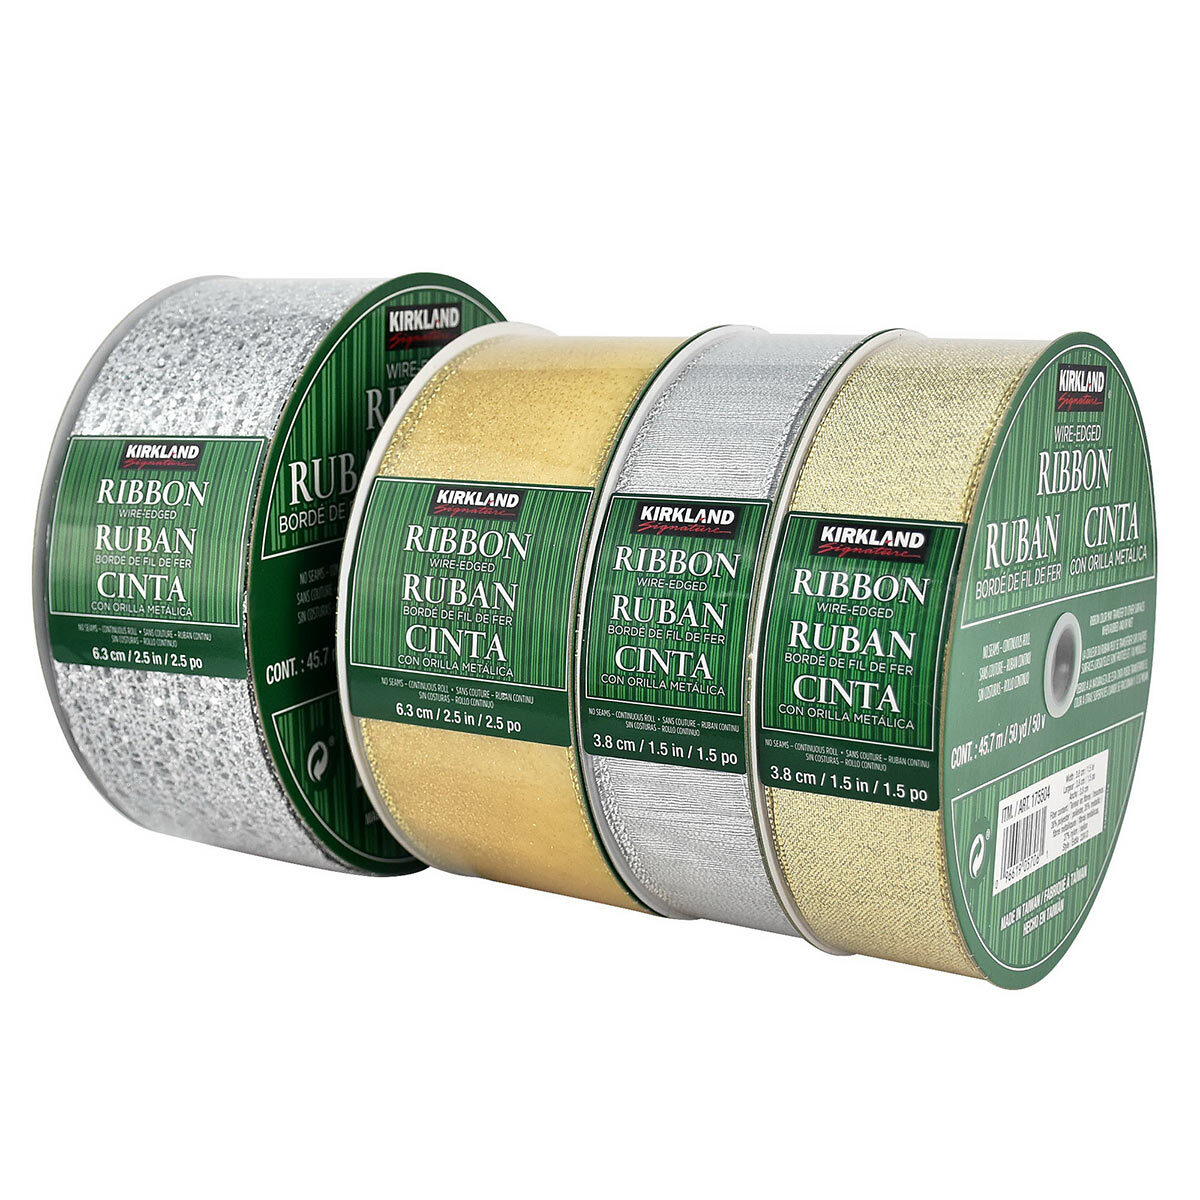 Buy KS Wire Edge Ribbon Classic Gold / Silver Packaging Image at Costco.co.uk